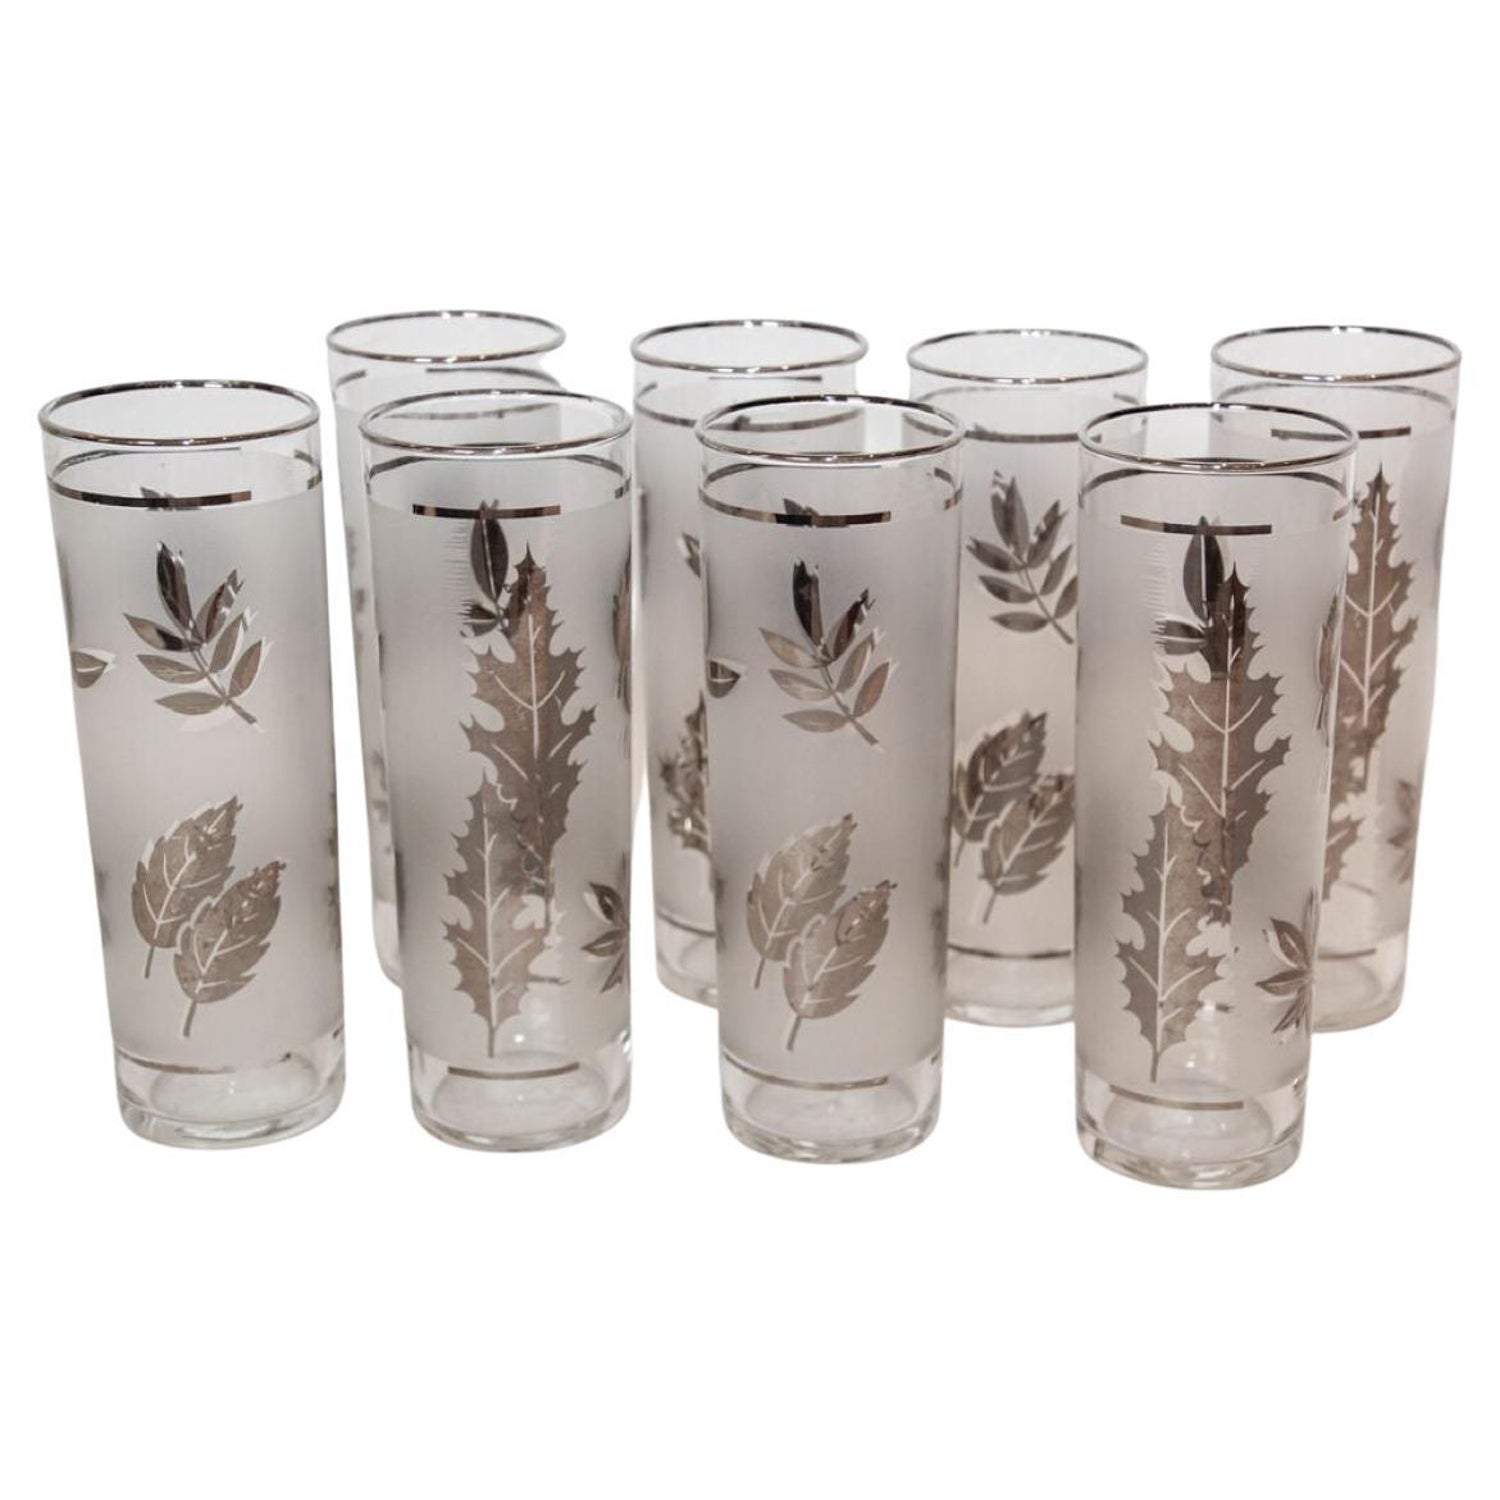 https://a.1stdibscdn.com/1950s-silver-foliage-highball-cocktail-glasses-by-libbey-glass-co-set-of-8-for-sale/f_9068/f_353889321690276929812/f_35388932_1690276930169_bg_processed.jpg?width=1500